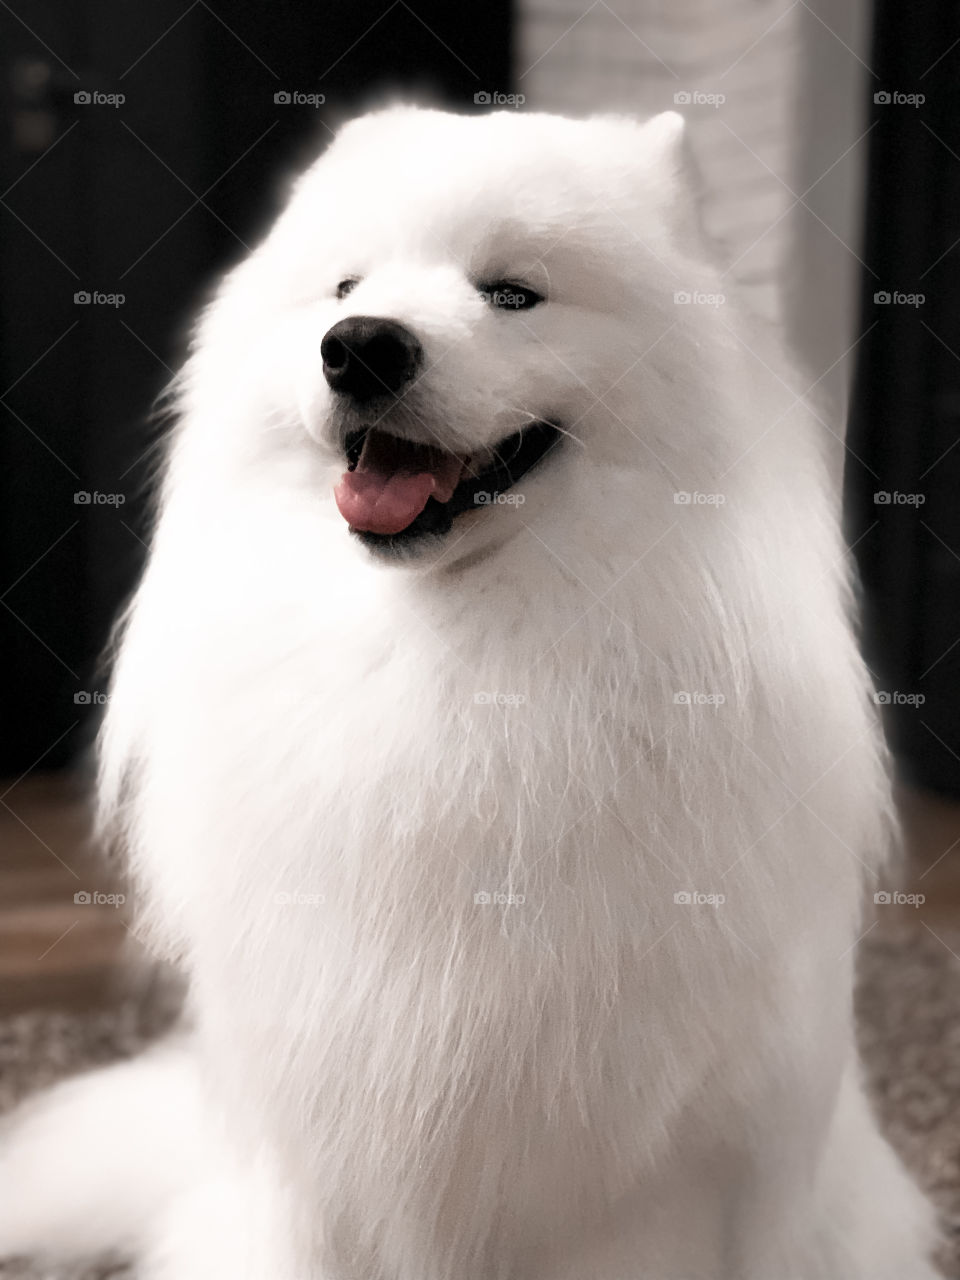 Who’s a good boy? This little white fluffy dog is always a good dog.